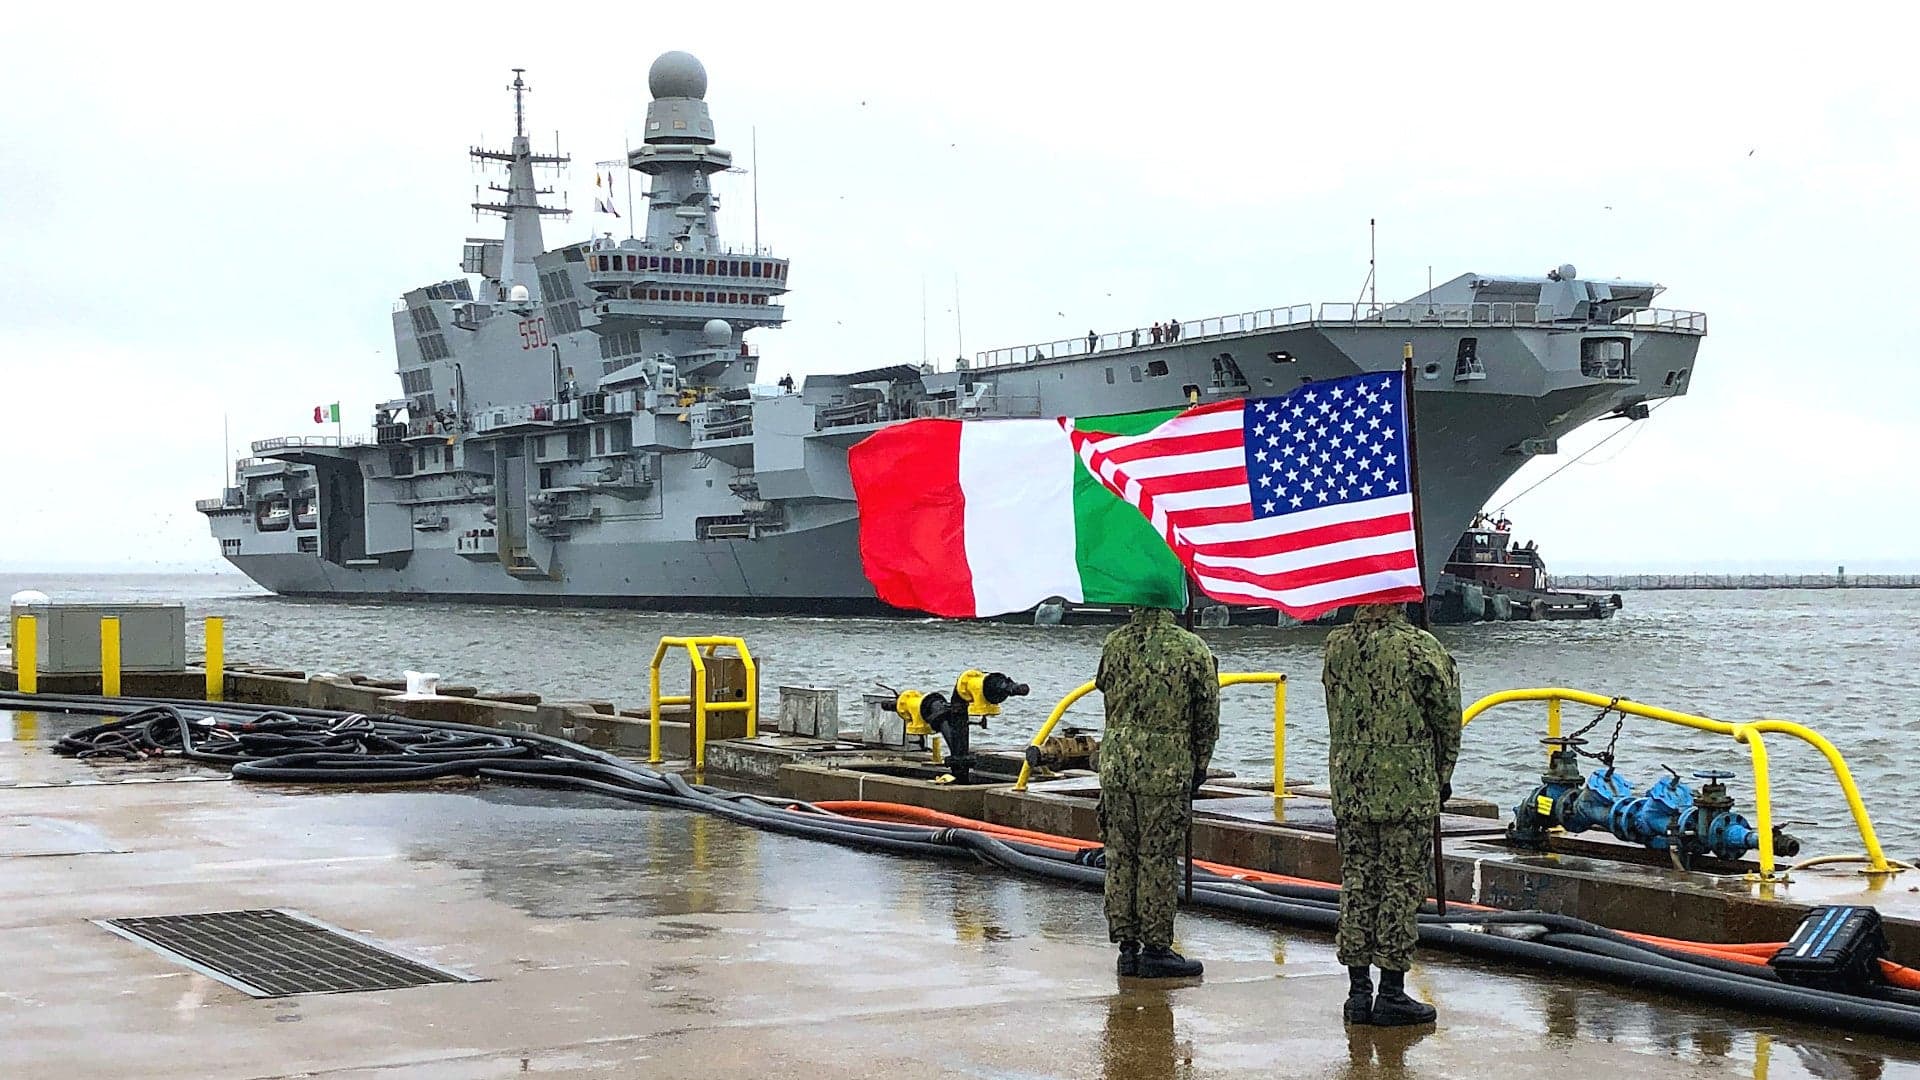 All You Need To Know About Italy’s F-35 Carrier That Just Arrived In The US